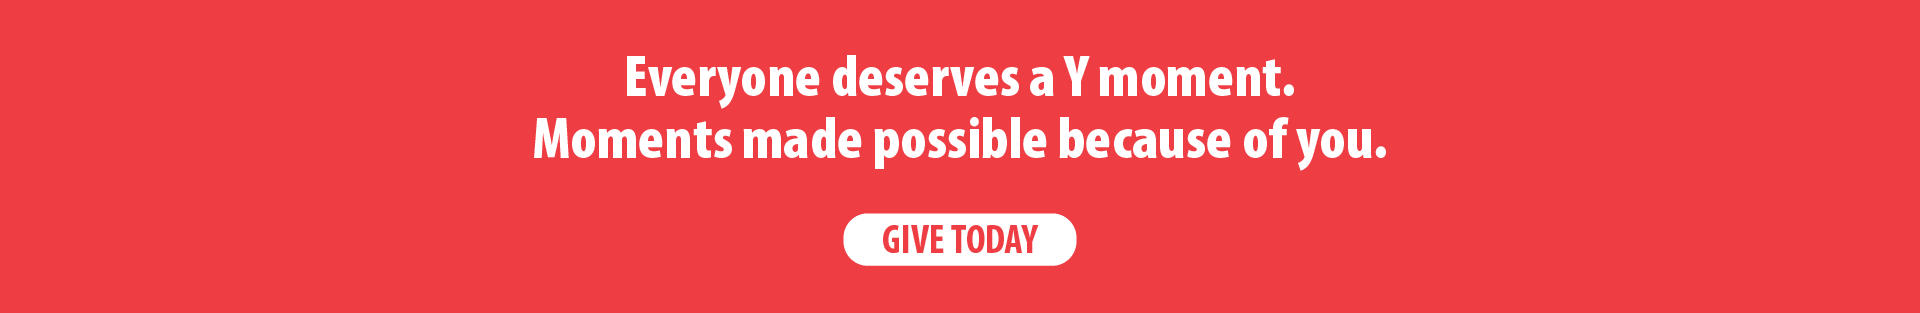 Everyone deserves a Y moment. Moments made possible because of you. Give today.